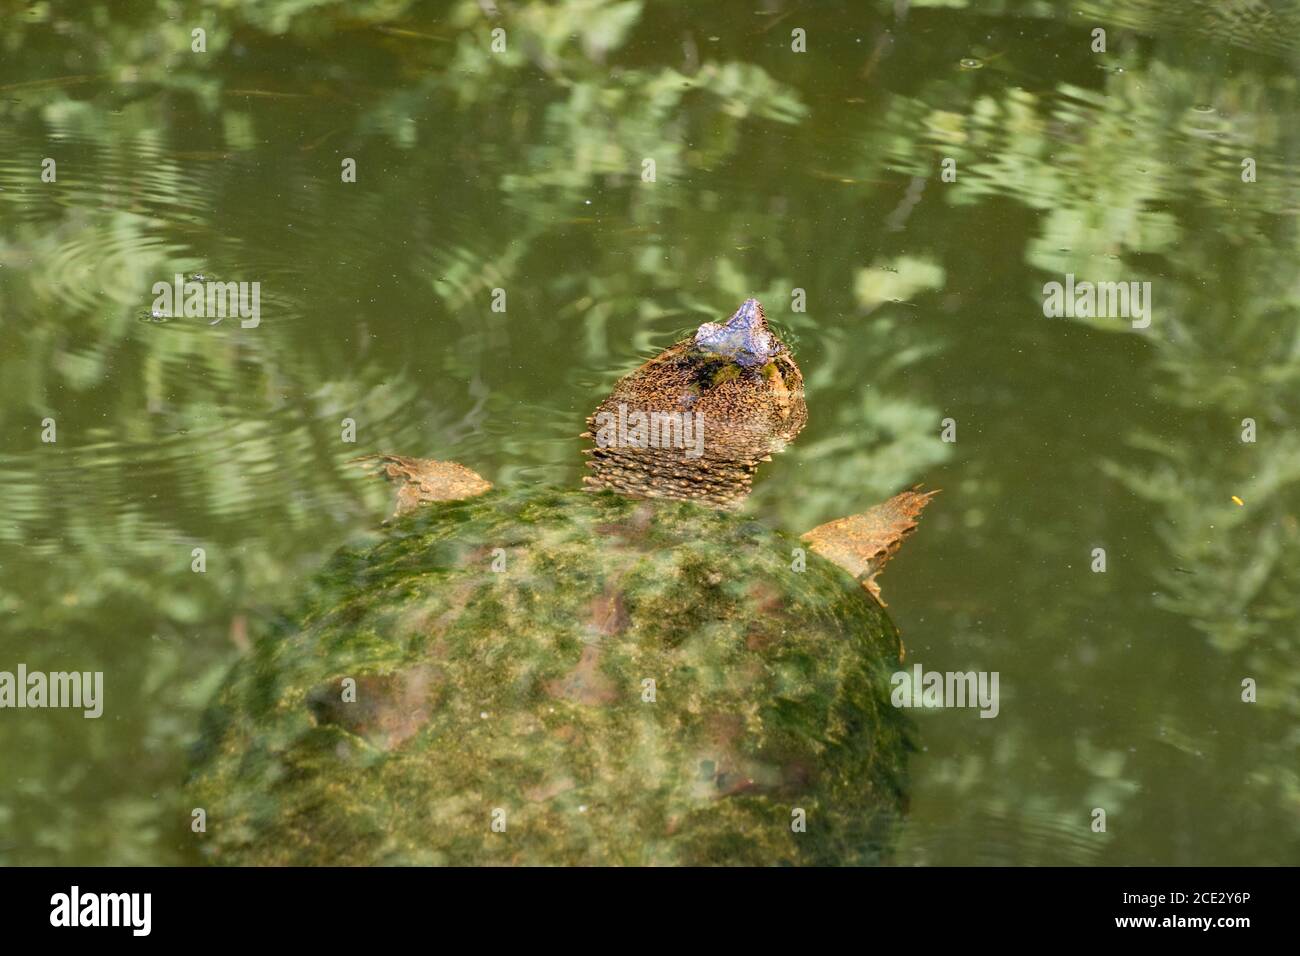 A mossy snapping turtle swimming in a murky lake Stock Photo